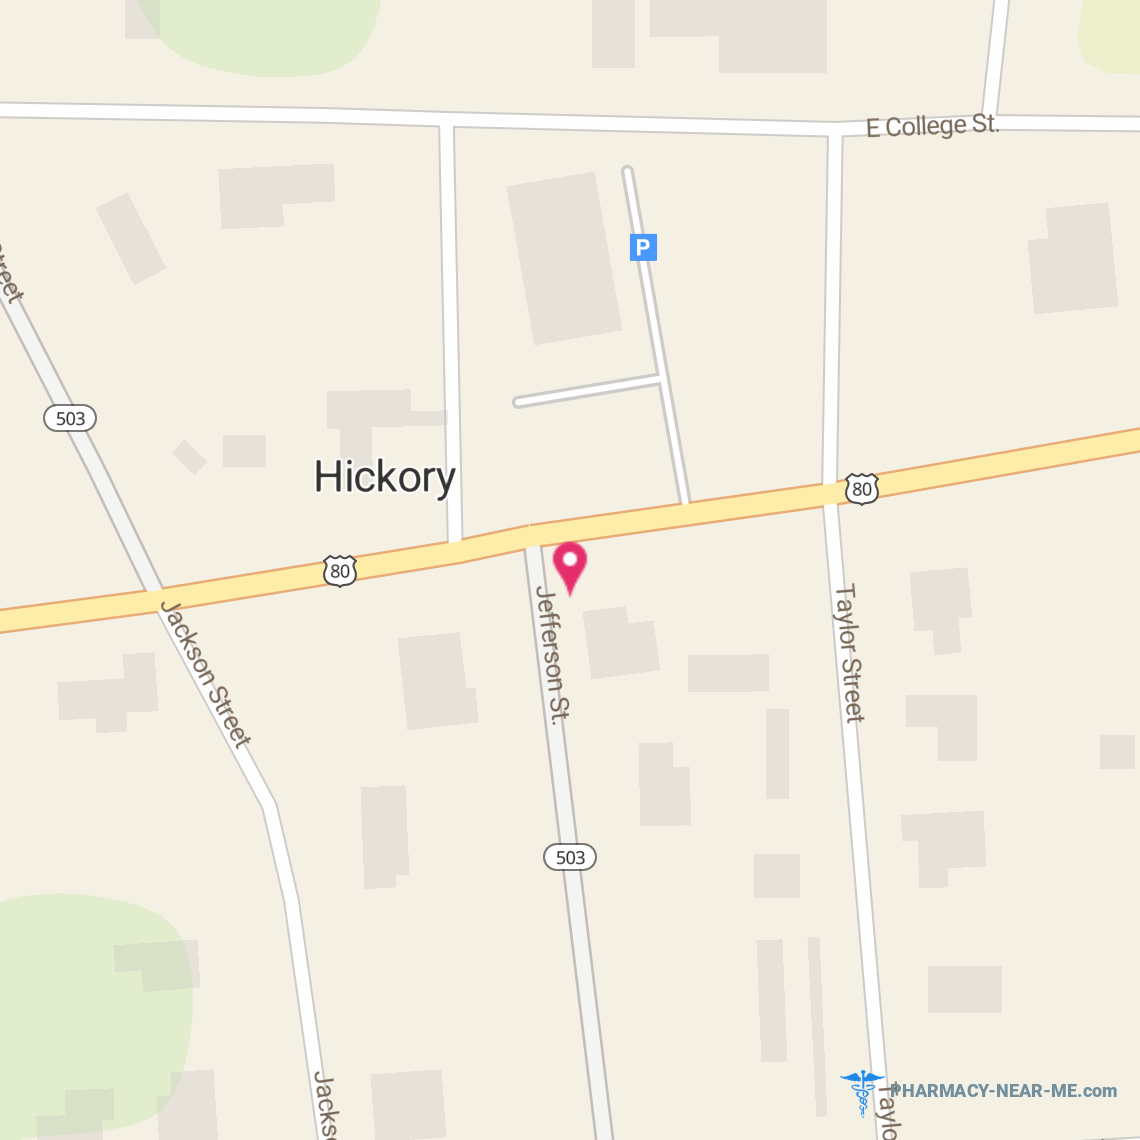 HICKORY FAMILY PHARMACY - Pharmacy Hours, Phone, Reviews & Information: 18205 Highway 80, Hickory, Mississippi 39332, United States